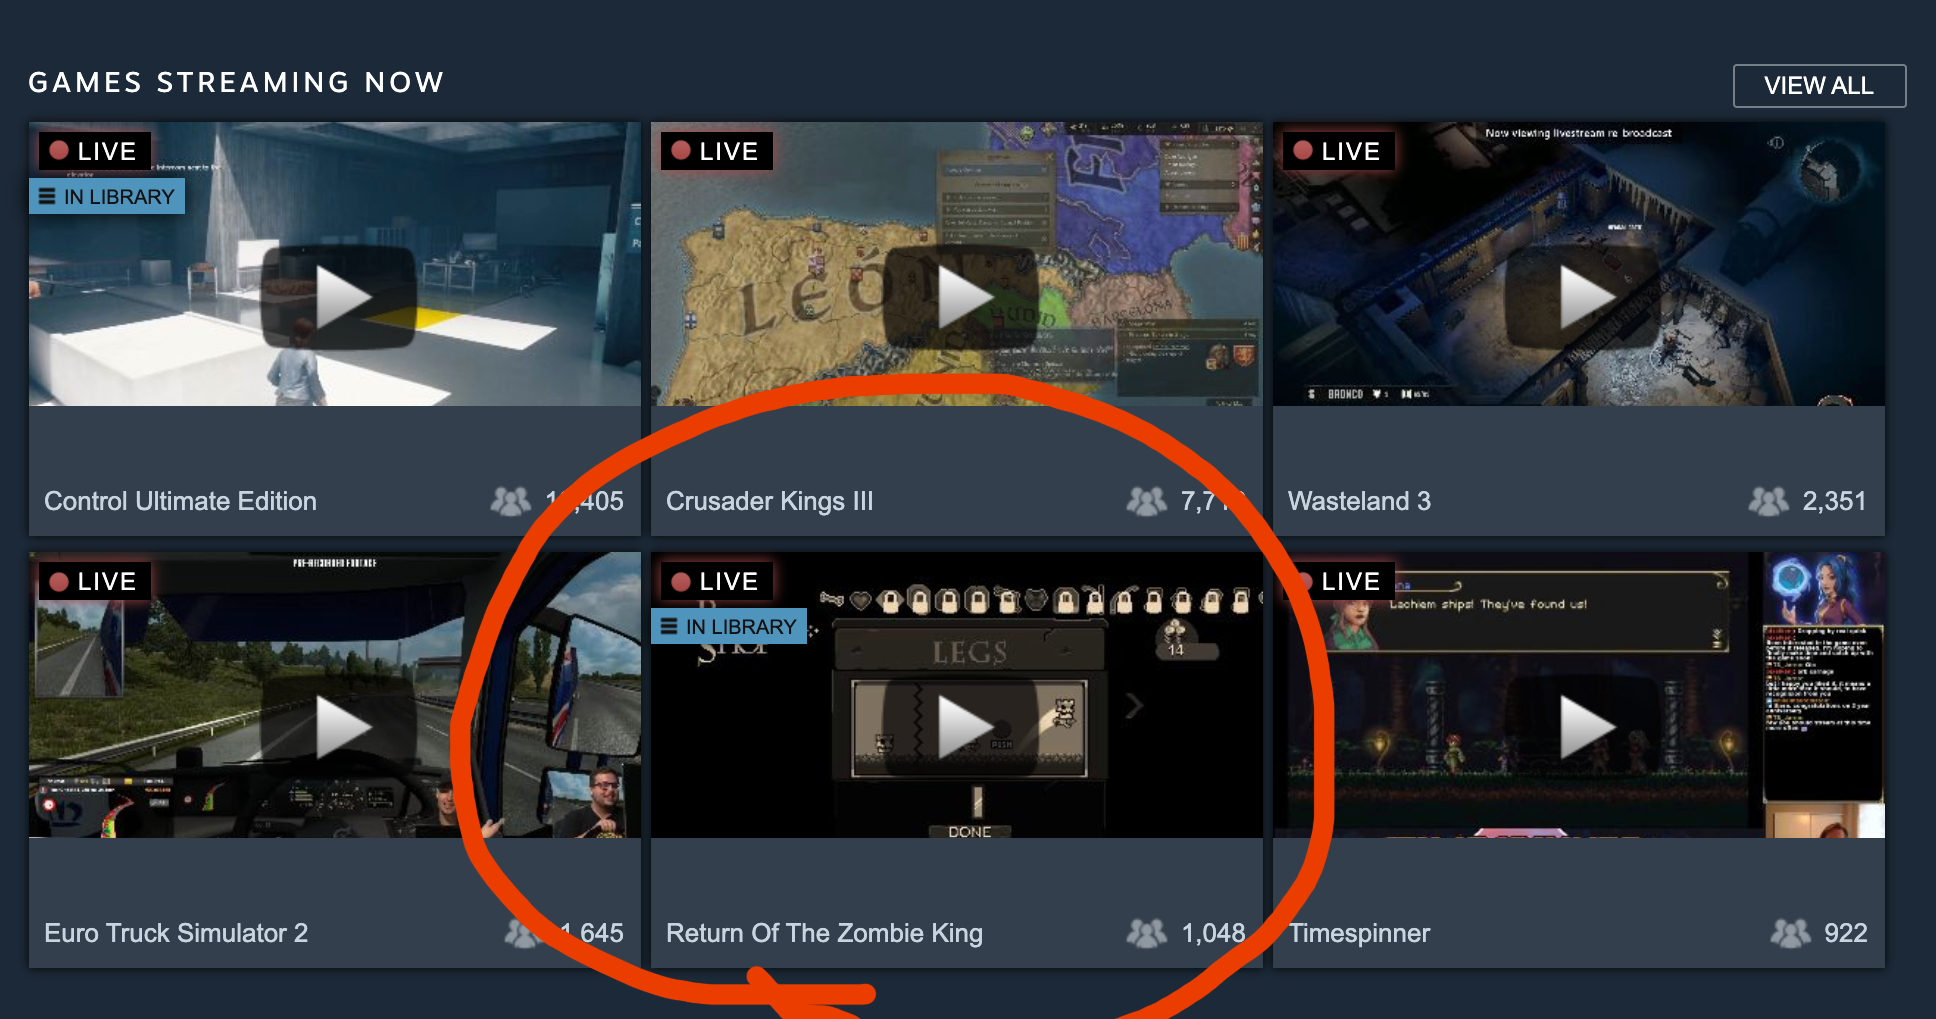 How to write a Steam store page short description - Game If You Are